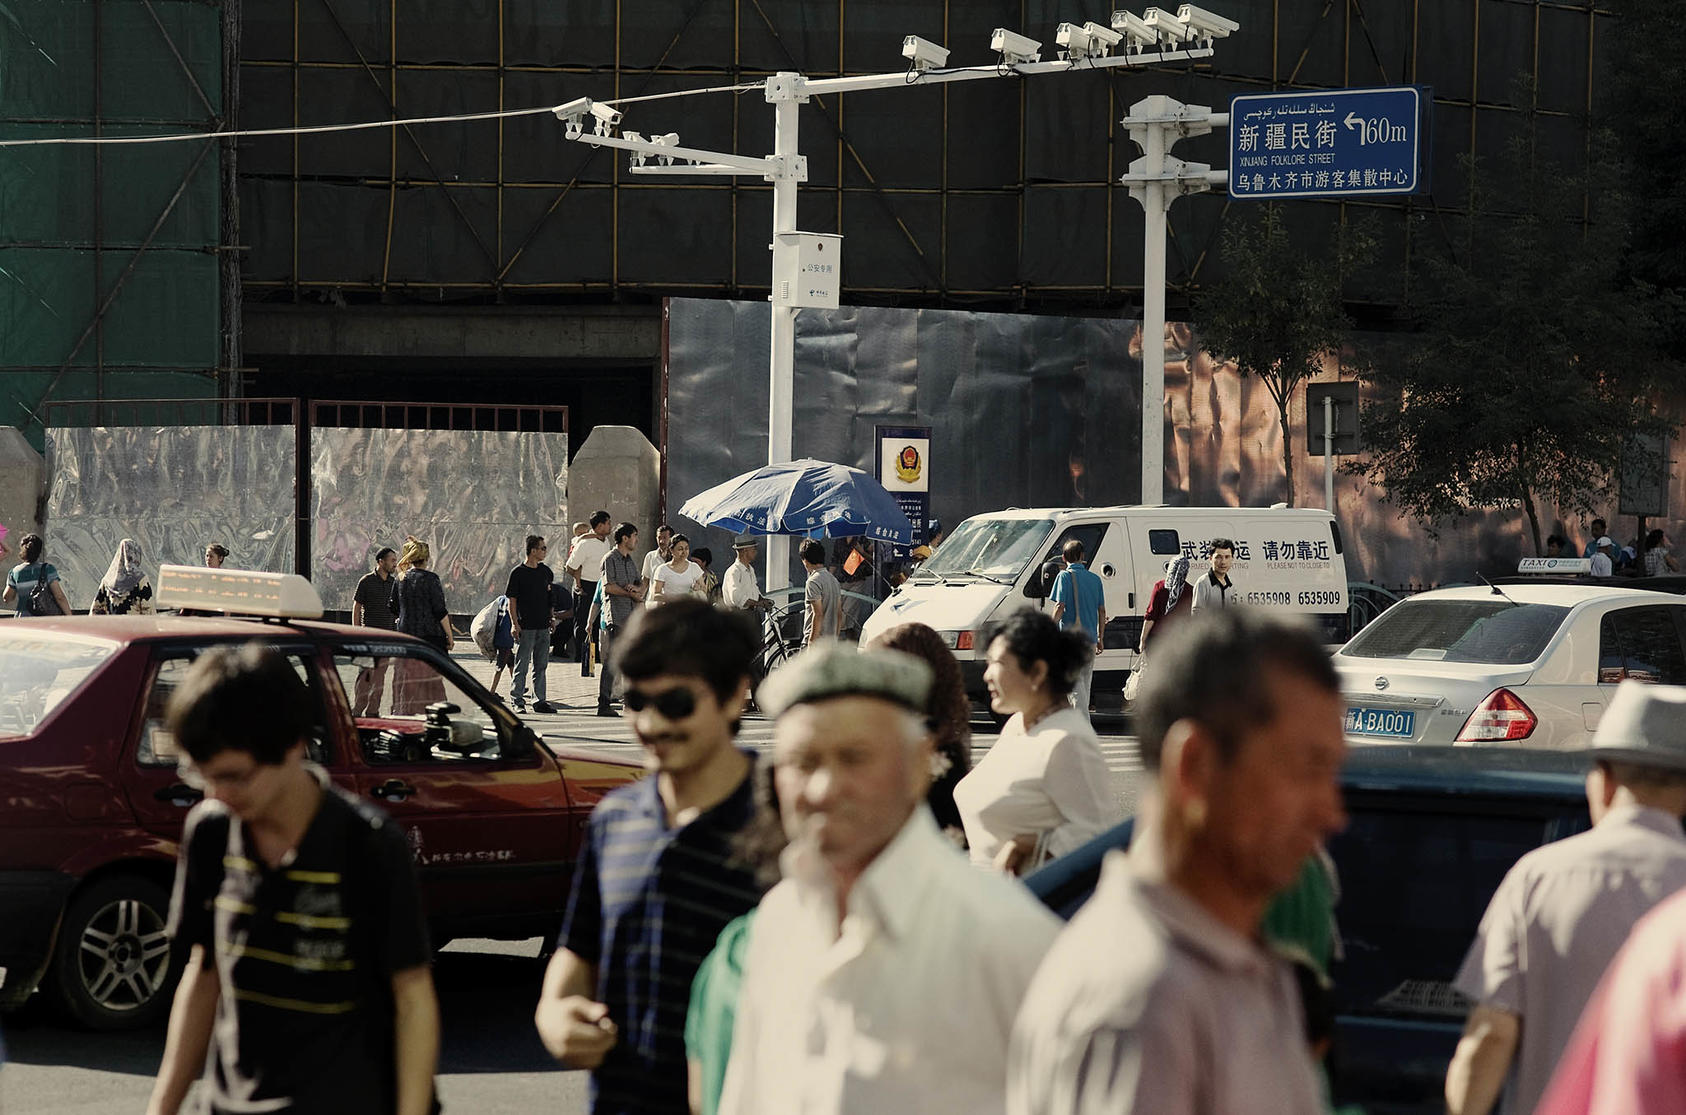 A set of surveillance cameras at a busy crossroad in Urumqi, Xinjiang’s capital in China, on July 20, 2010. (The New York Times)